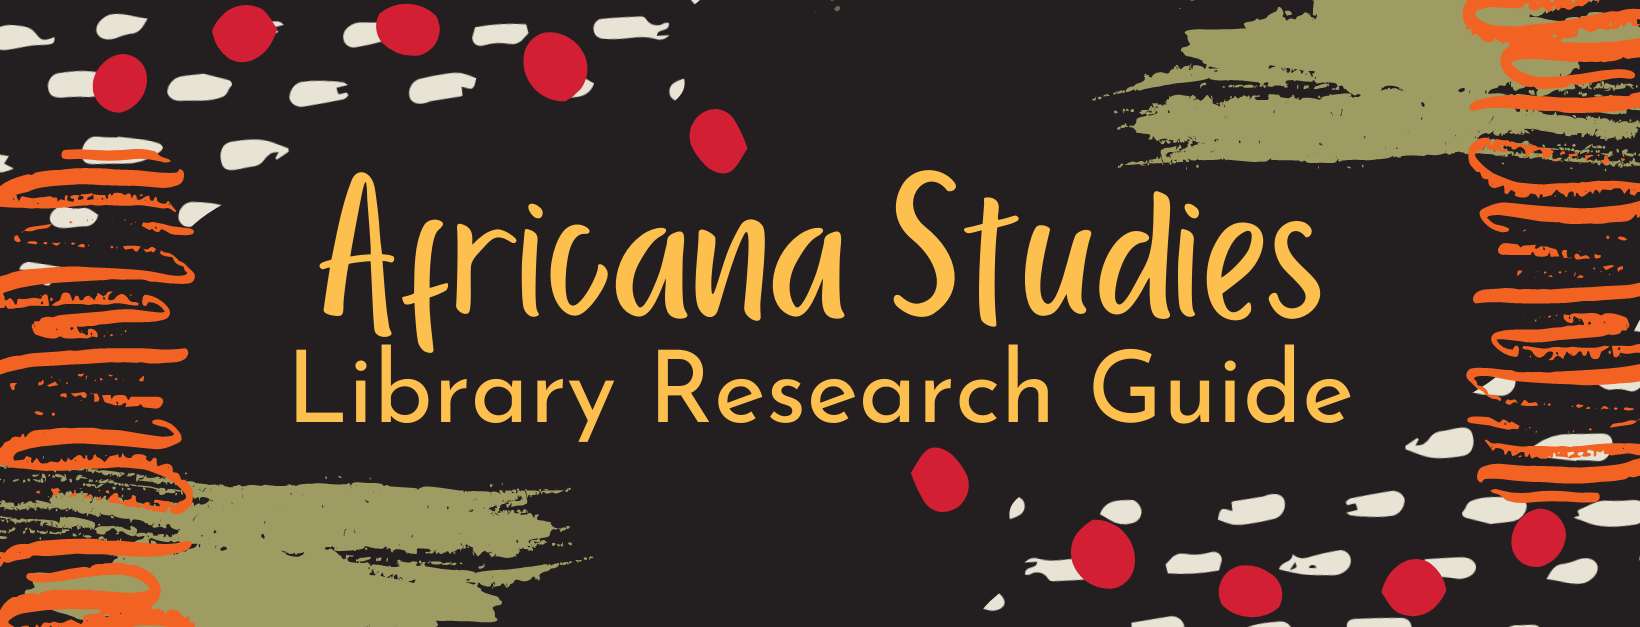 African Studies Library Research Guide graphic created by Stephanie Birch. This work is licensed under a Creative Commons Attribution-NonCommercial 4.0 International License. 